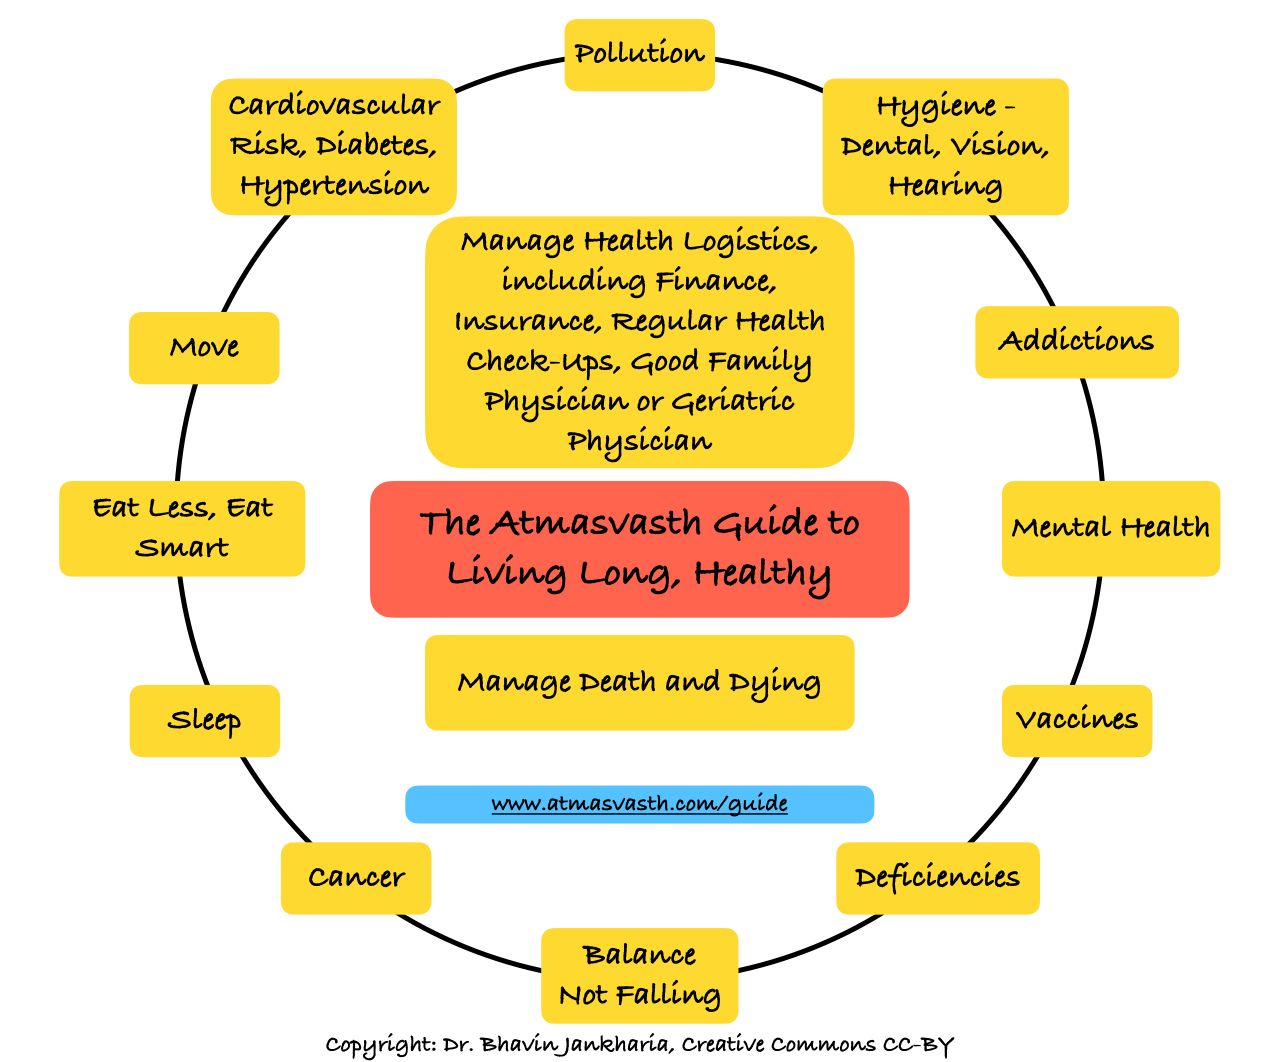 The Atmasvasth Guide to Living Long, Healthy